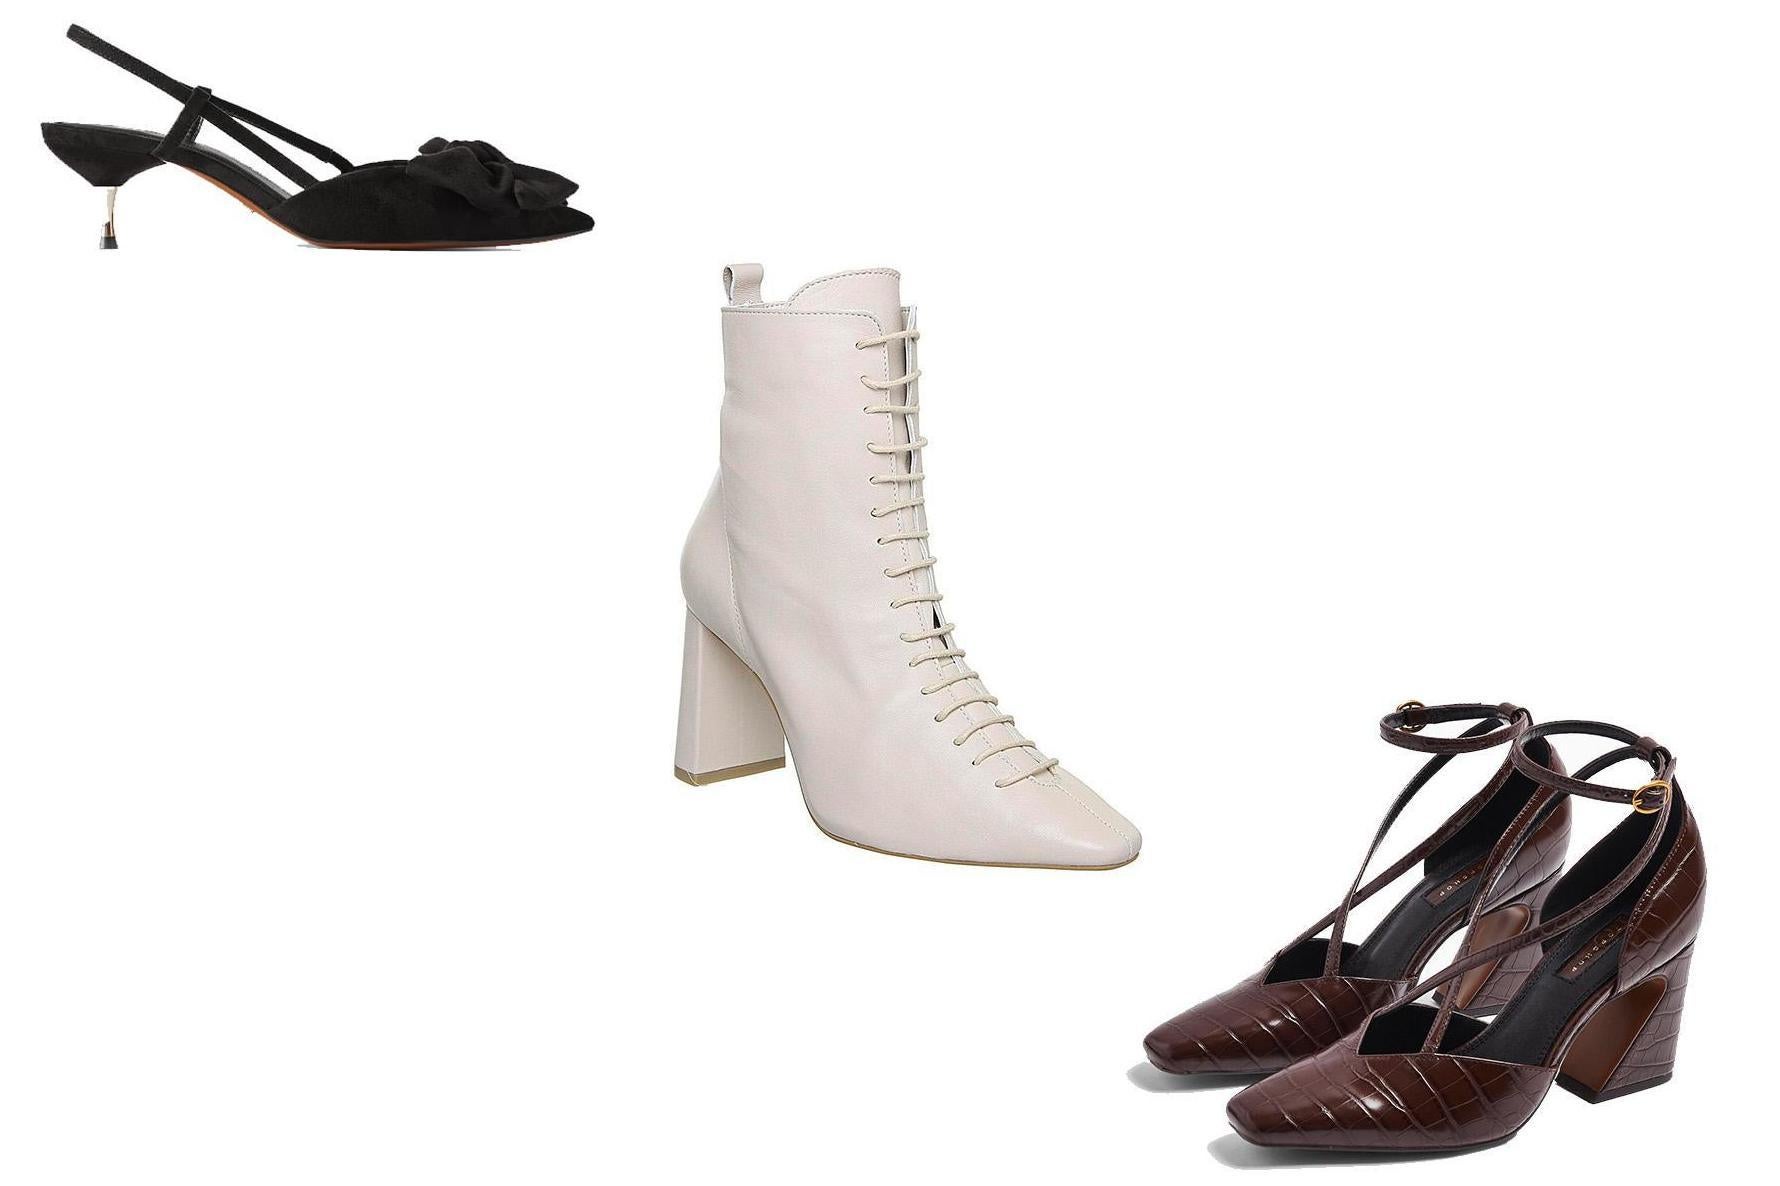 Kitten-Heel Shoes with Bow, £25.99, Zara; Affection Block Heel Boots, £95, Office; Ghost Brown Cross Front Court Shoes, £46, Topshop